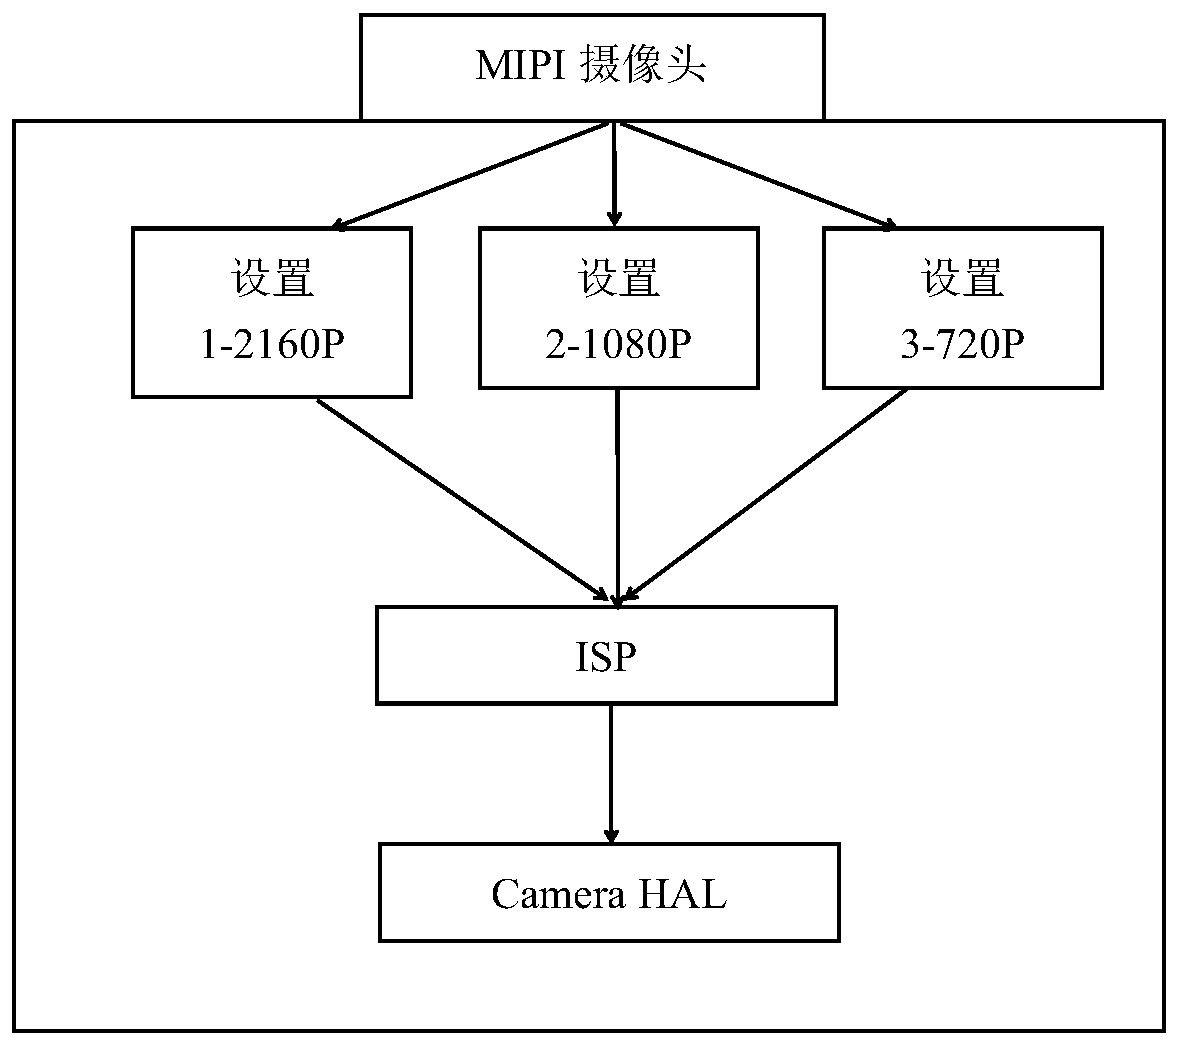 Method and device for adjusting output resolution of MIPI camera